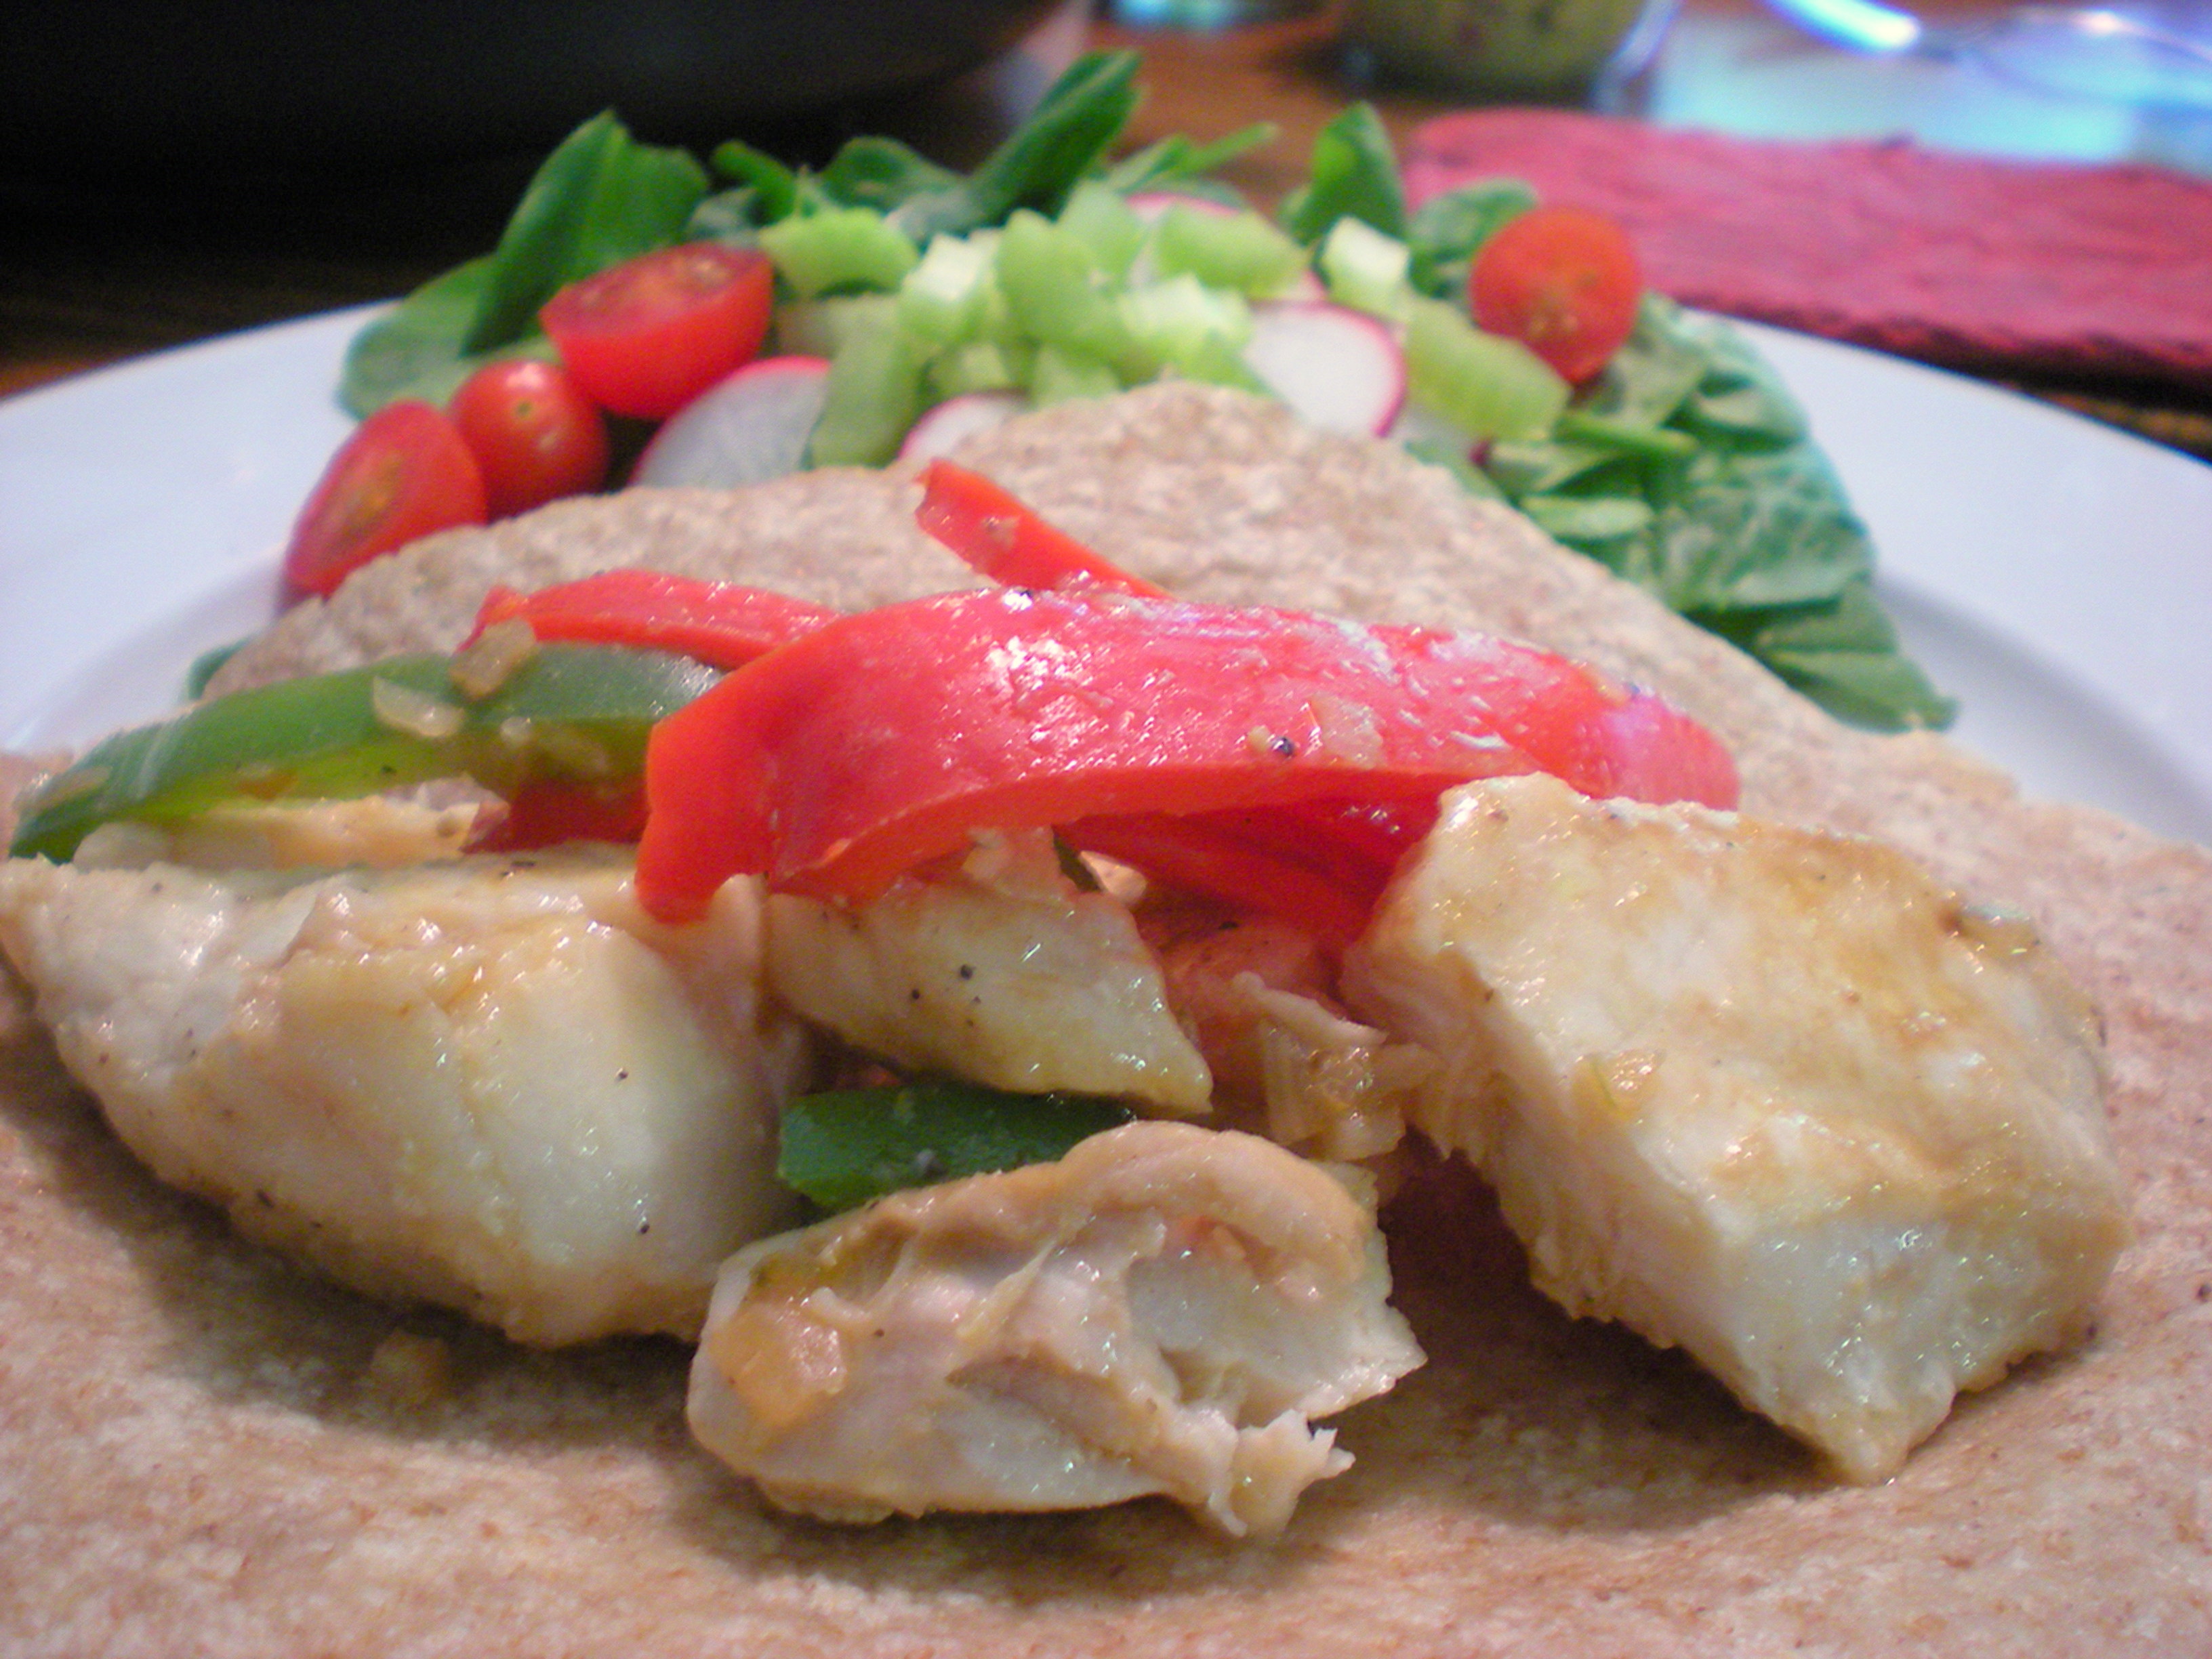 Place the fish and peppers on the wrap